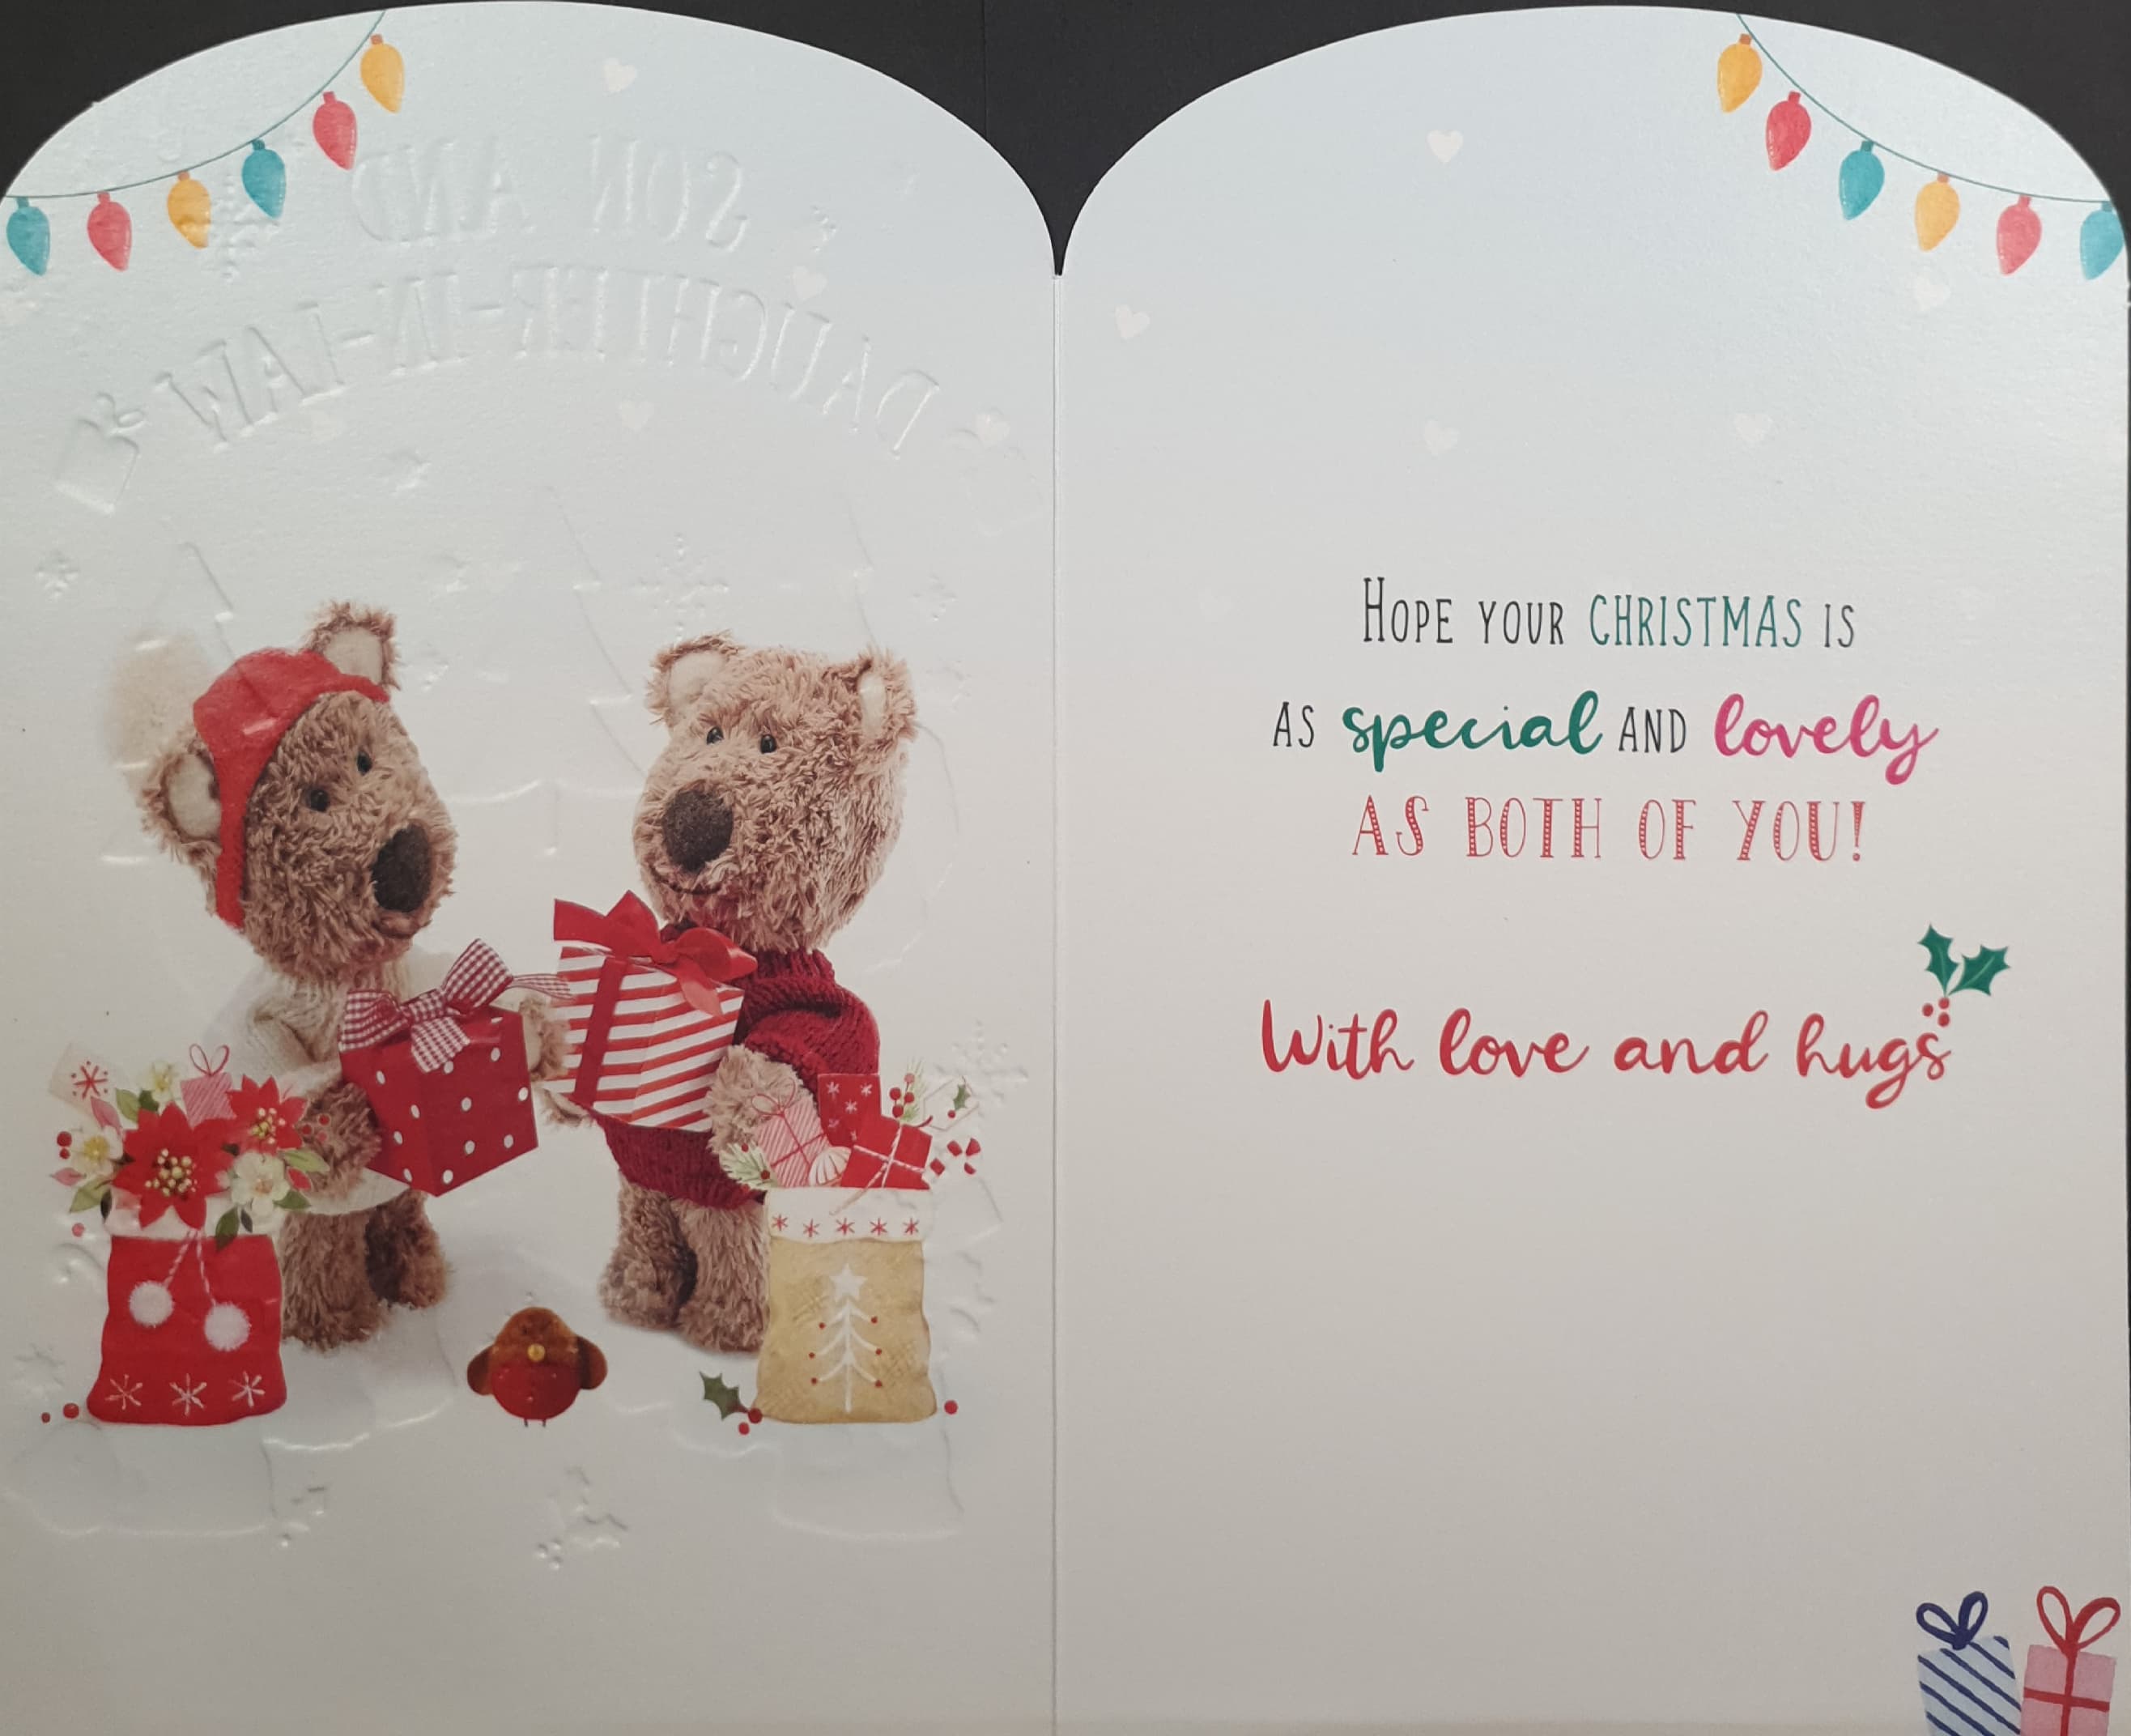 Son & Daughter in Law Christmas Card - Cute Teddies Exchanging Presents